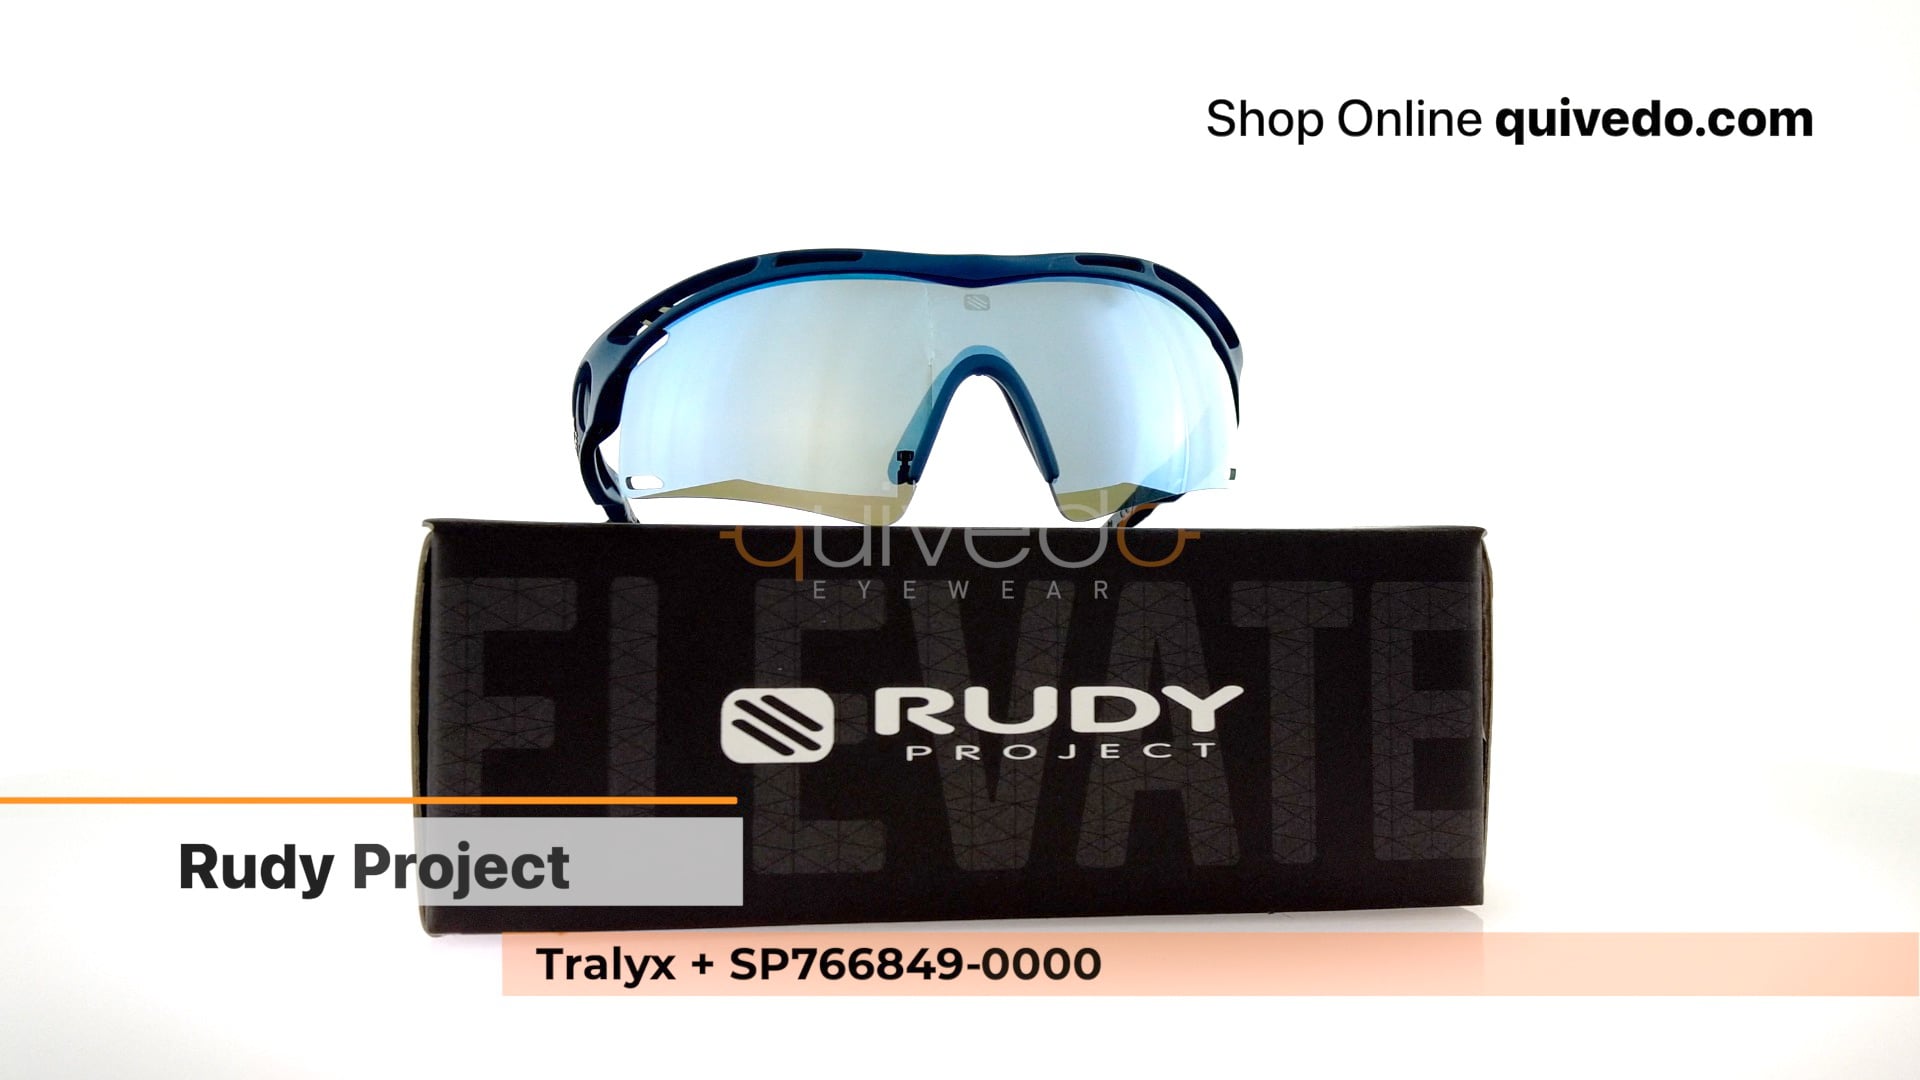 Rudy Project Tralyx + SP766849-0000